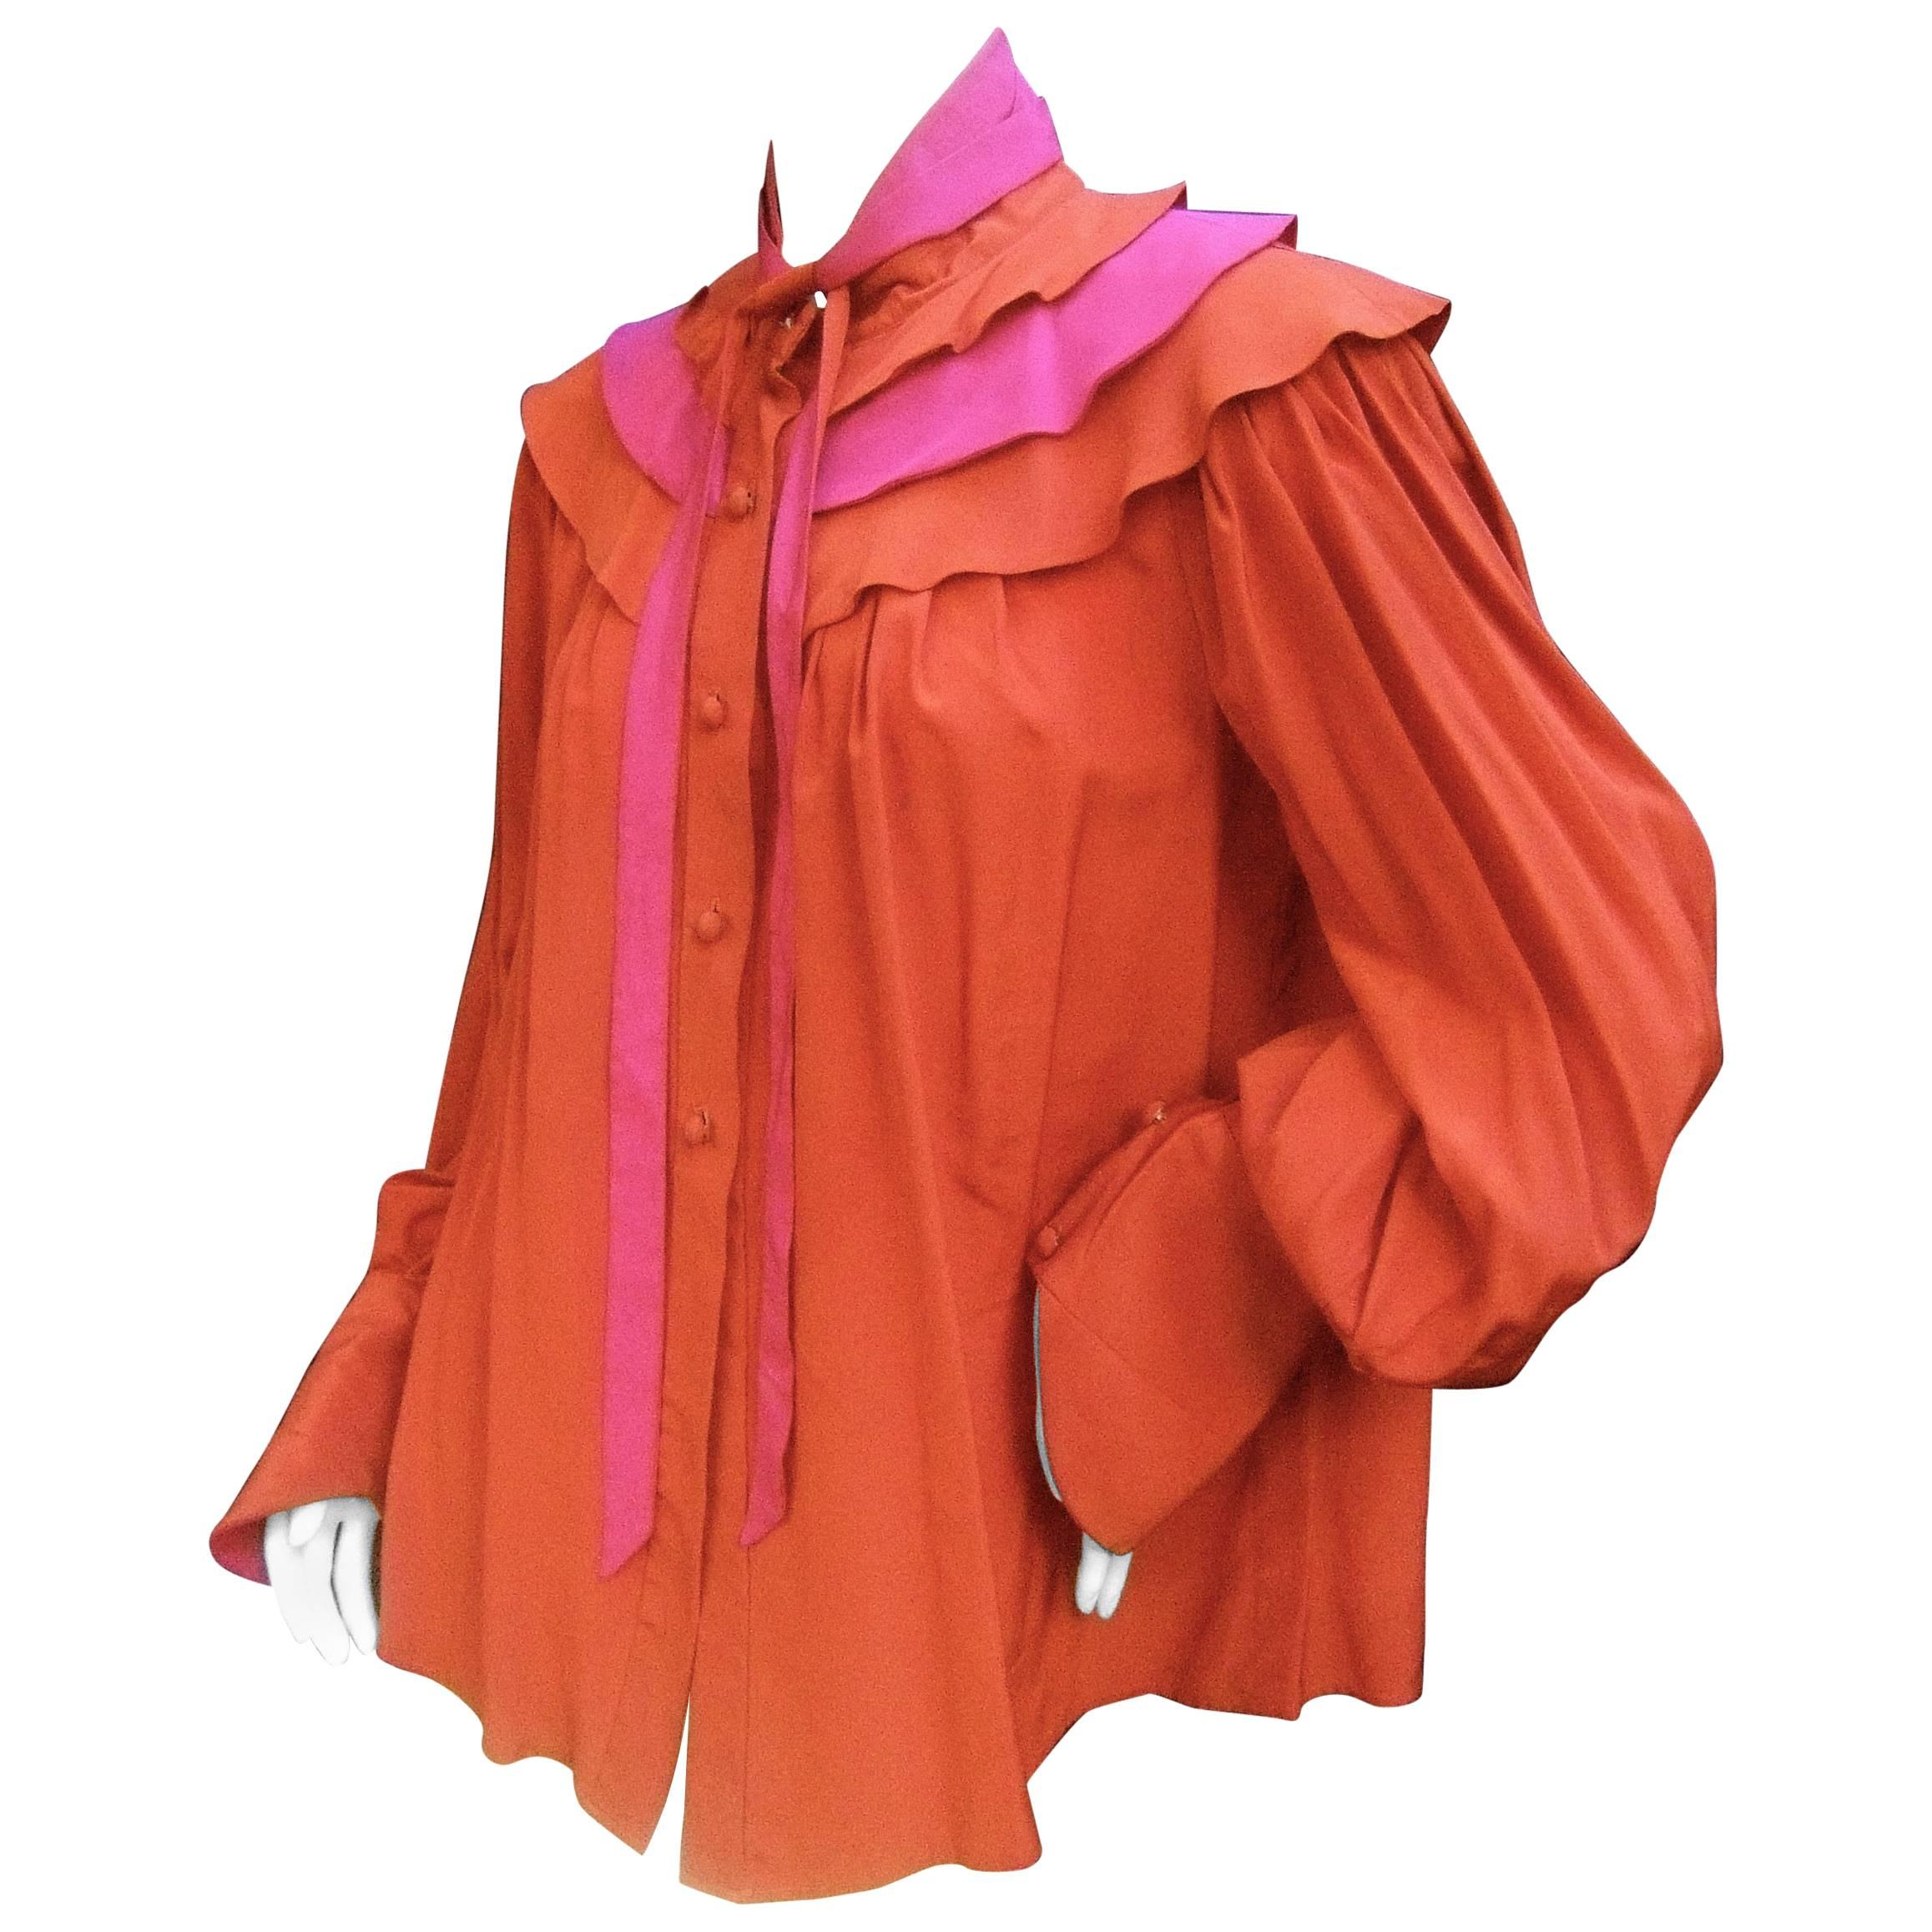 Roger & Gallet Paris Copper Fuchsia Silk Ruffled Tiered Bow Blouse c 1970s